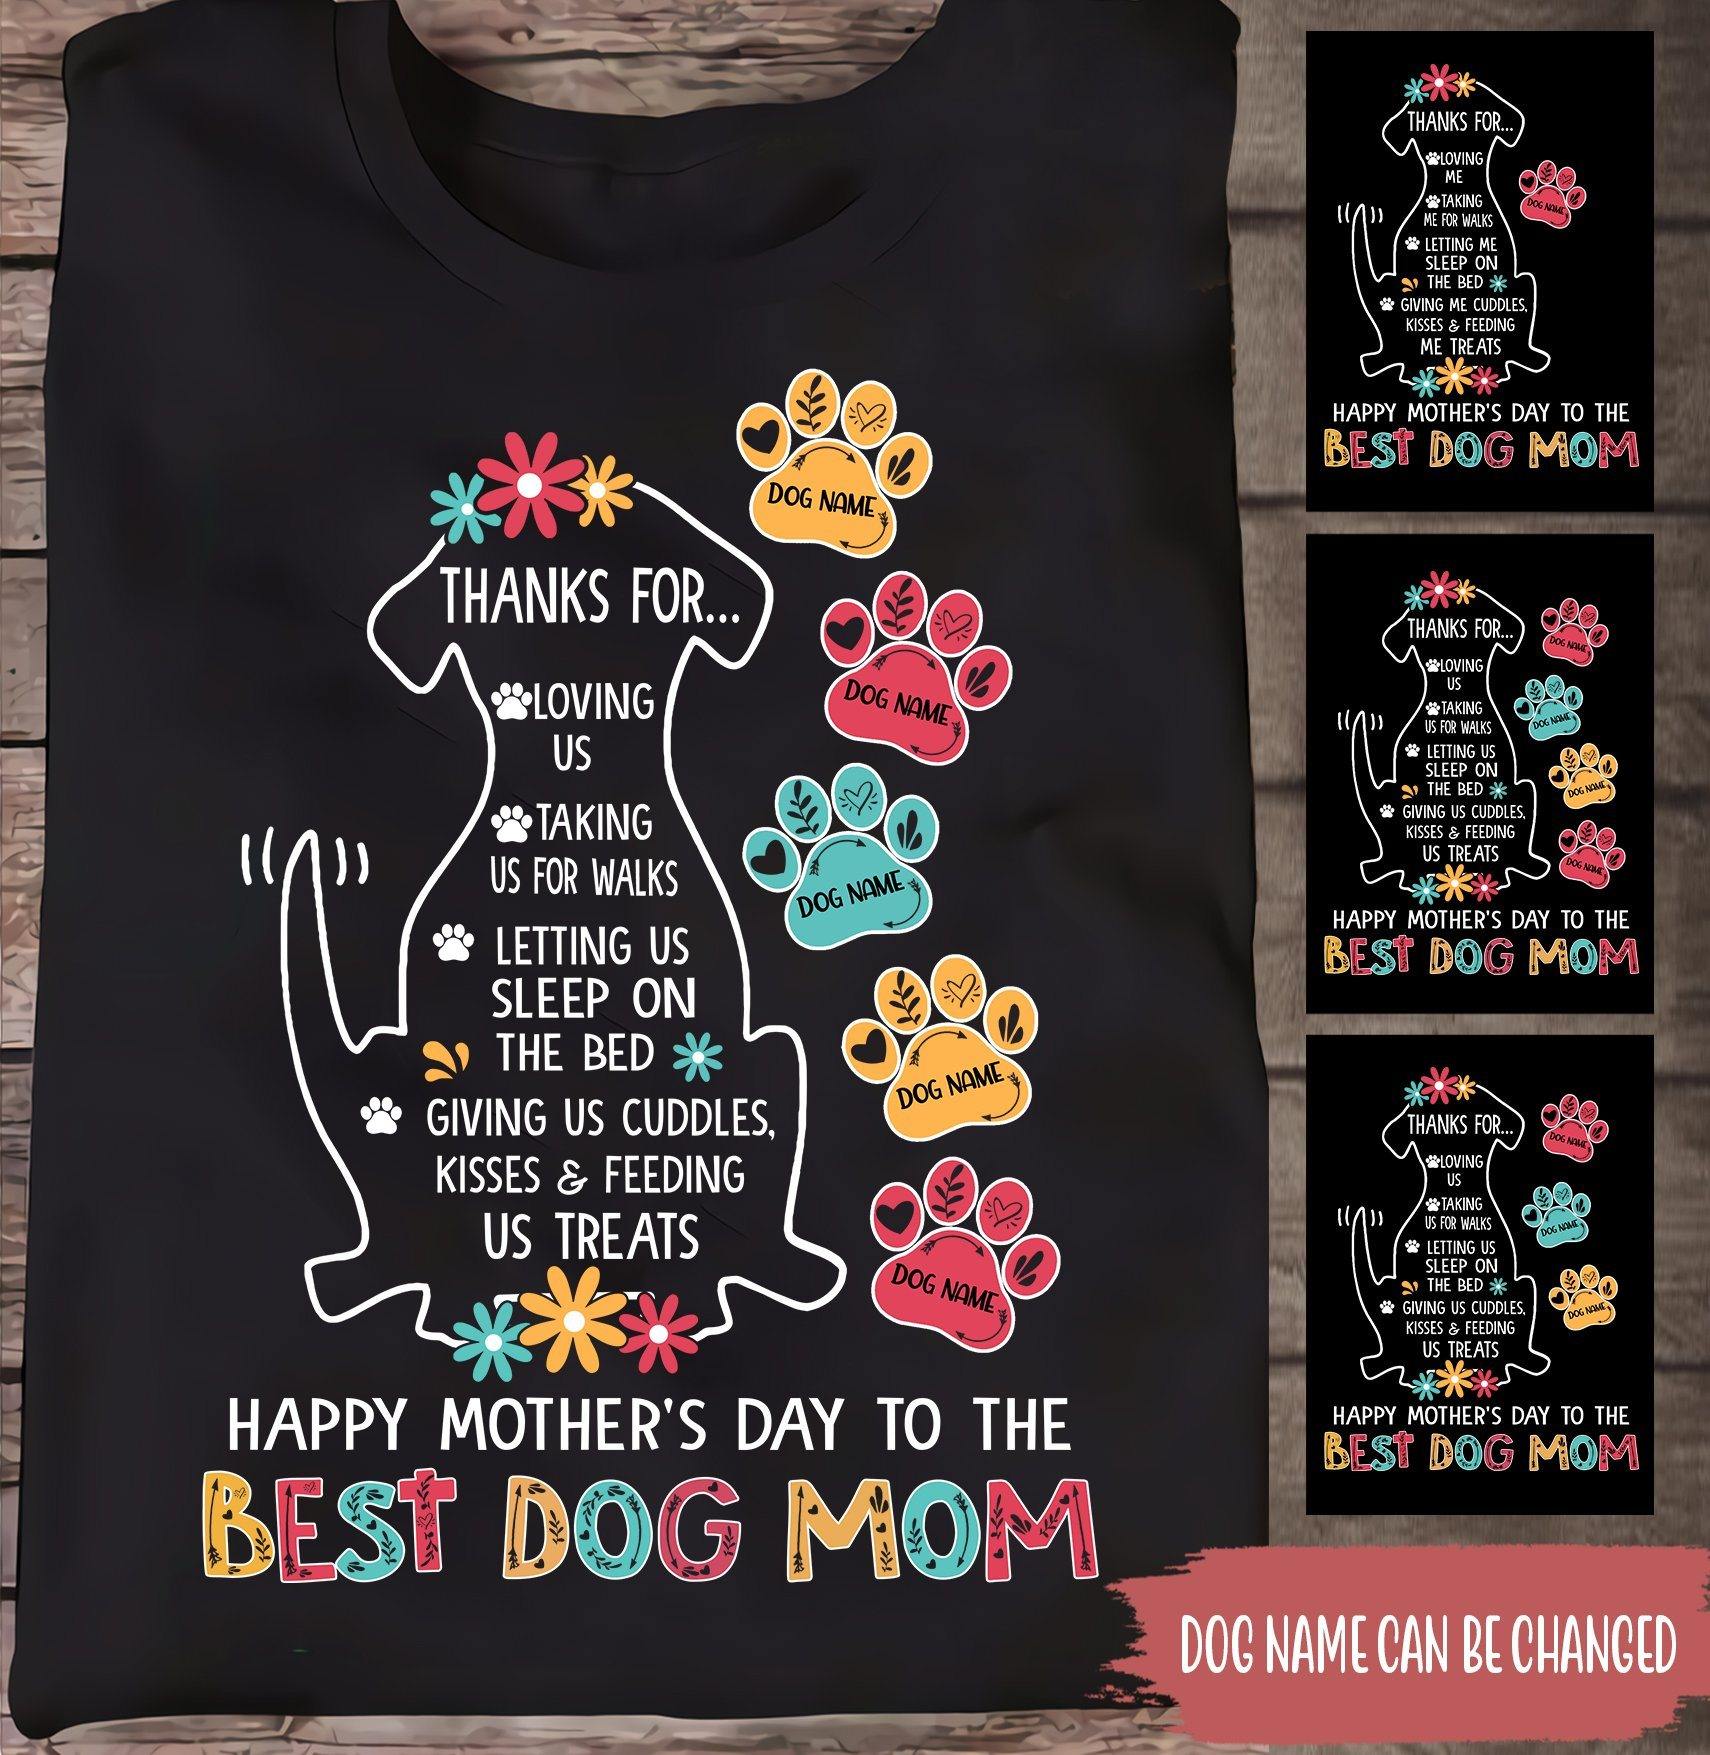 https://personal84.com/cdn/shop/products/dog-custom-t-shirt-happy-mother-s-day-to-the-best-dog-mom-personalized-gift-personal84_1710x.jpg?v=1640841774